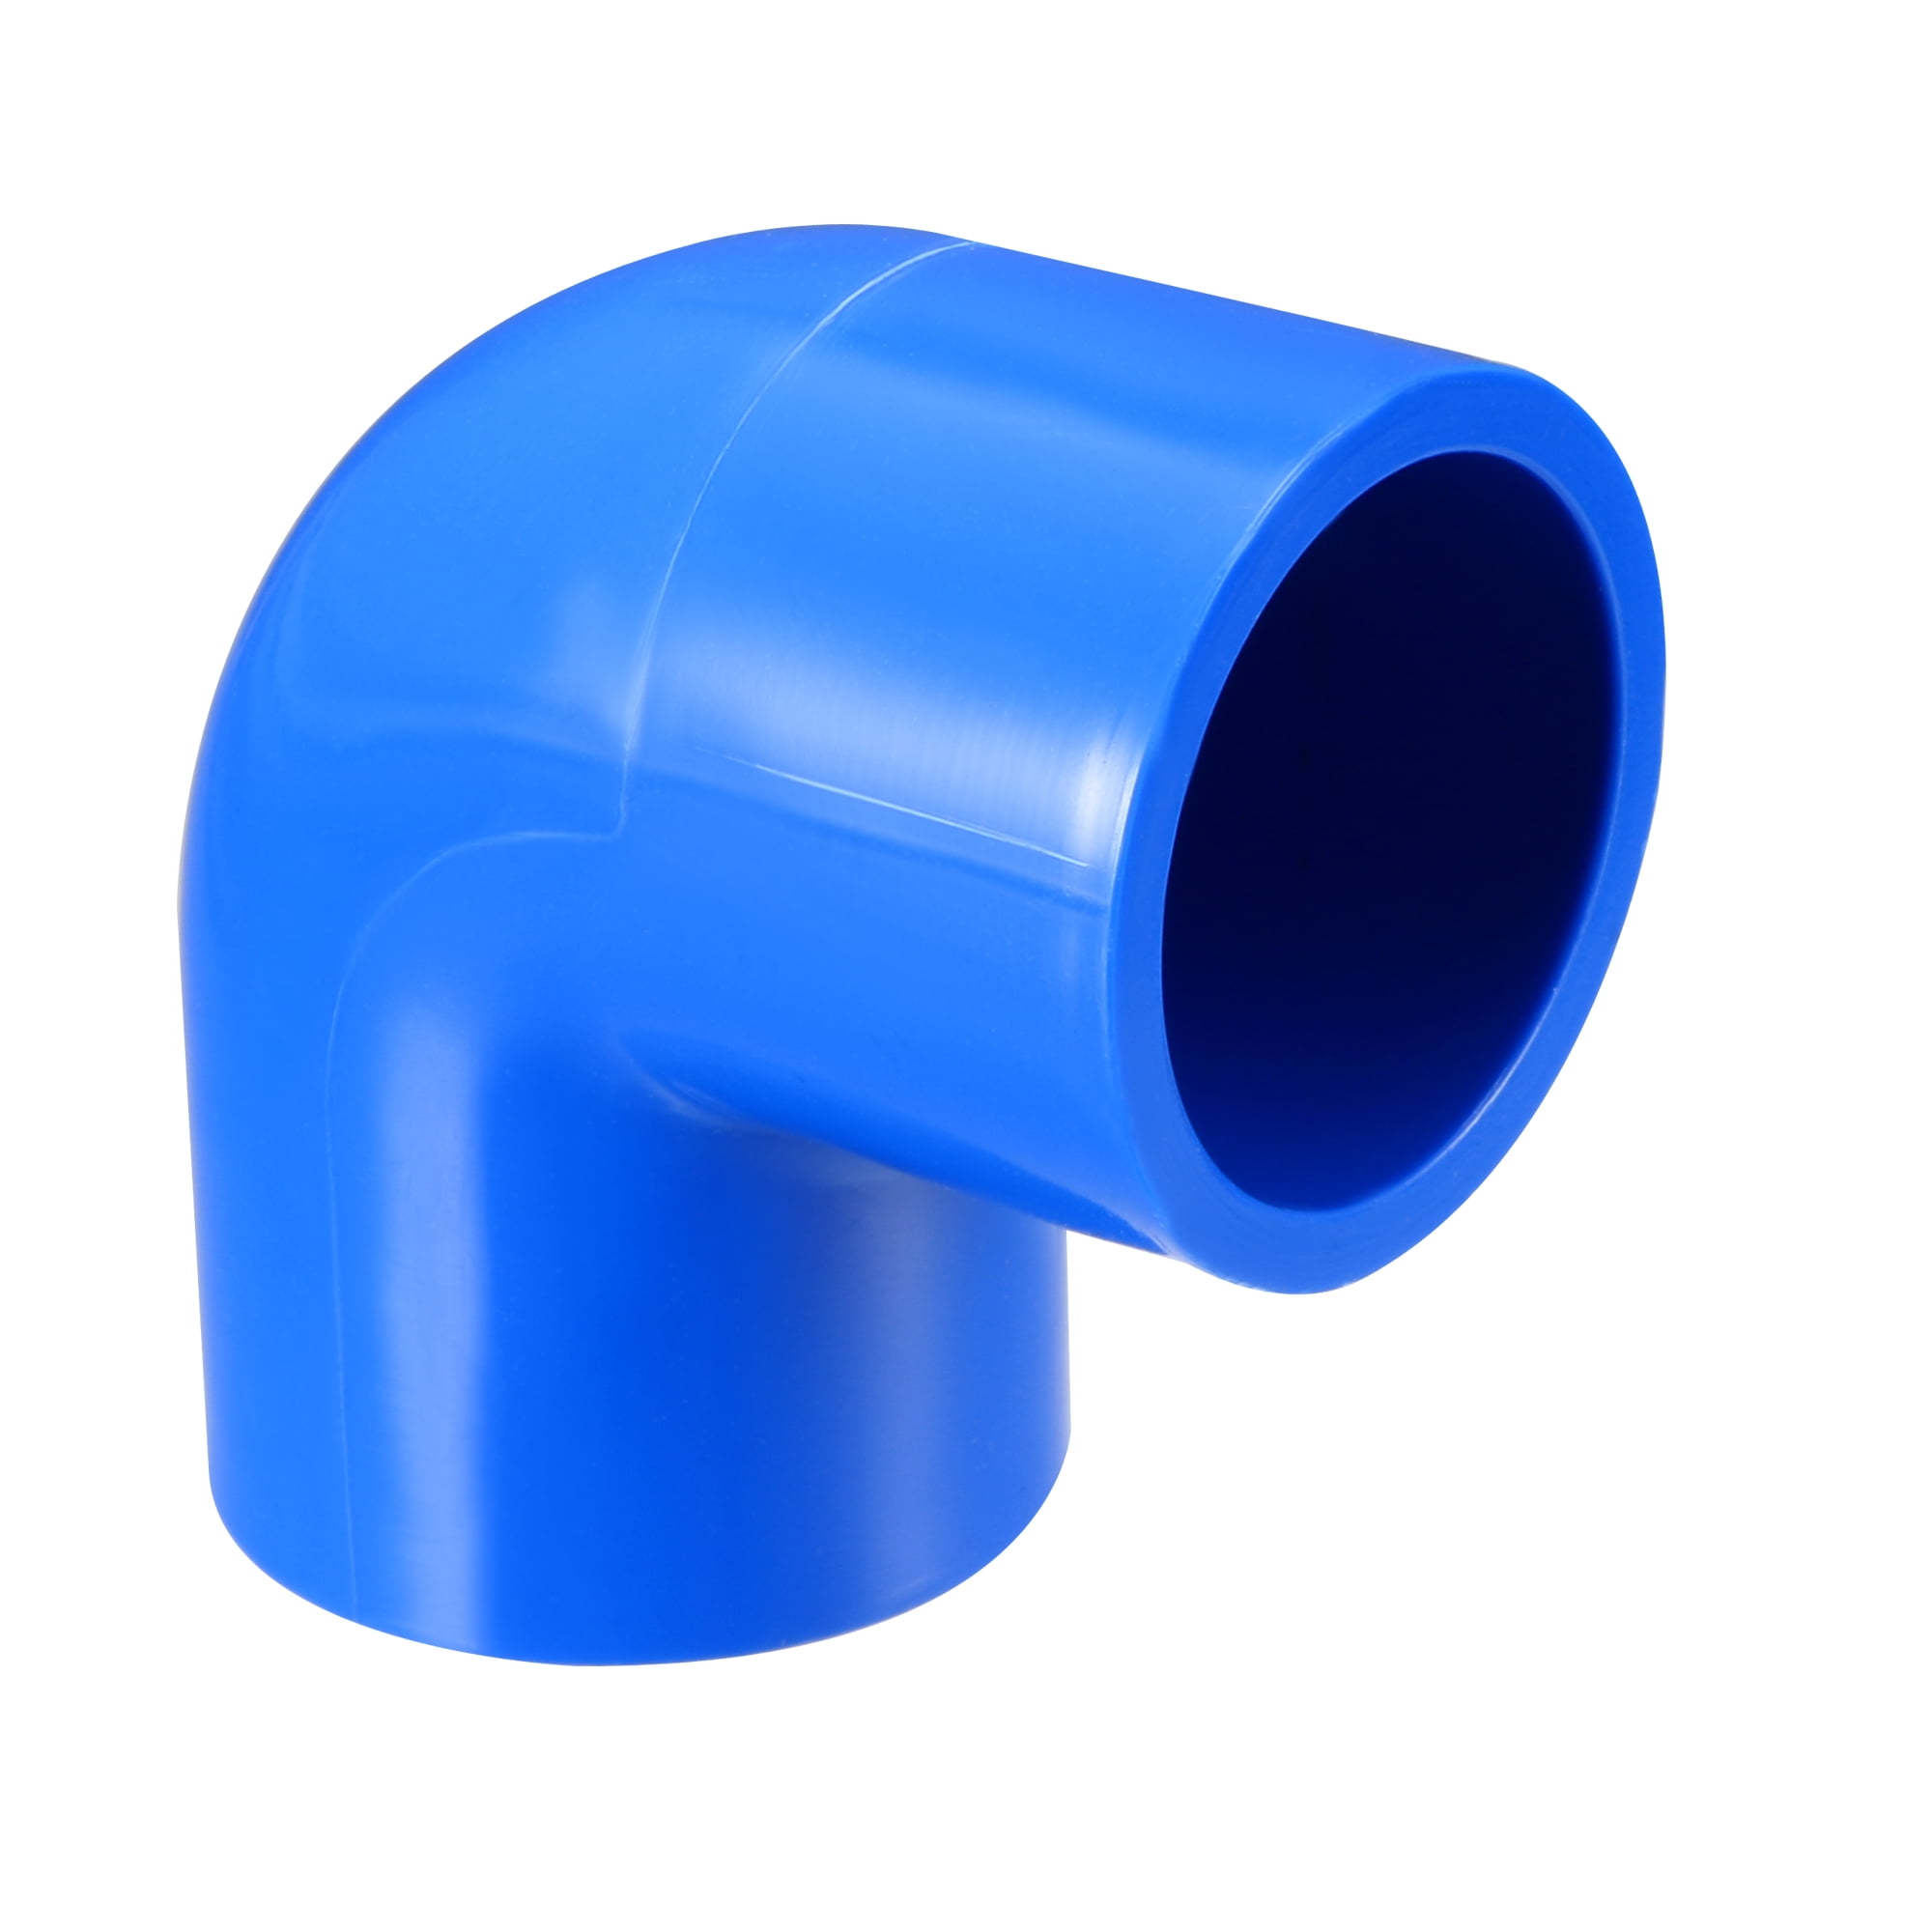 Slip PVC Pipe Fitting Elbow Coupling Adapter Blue Parts 